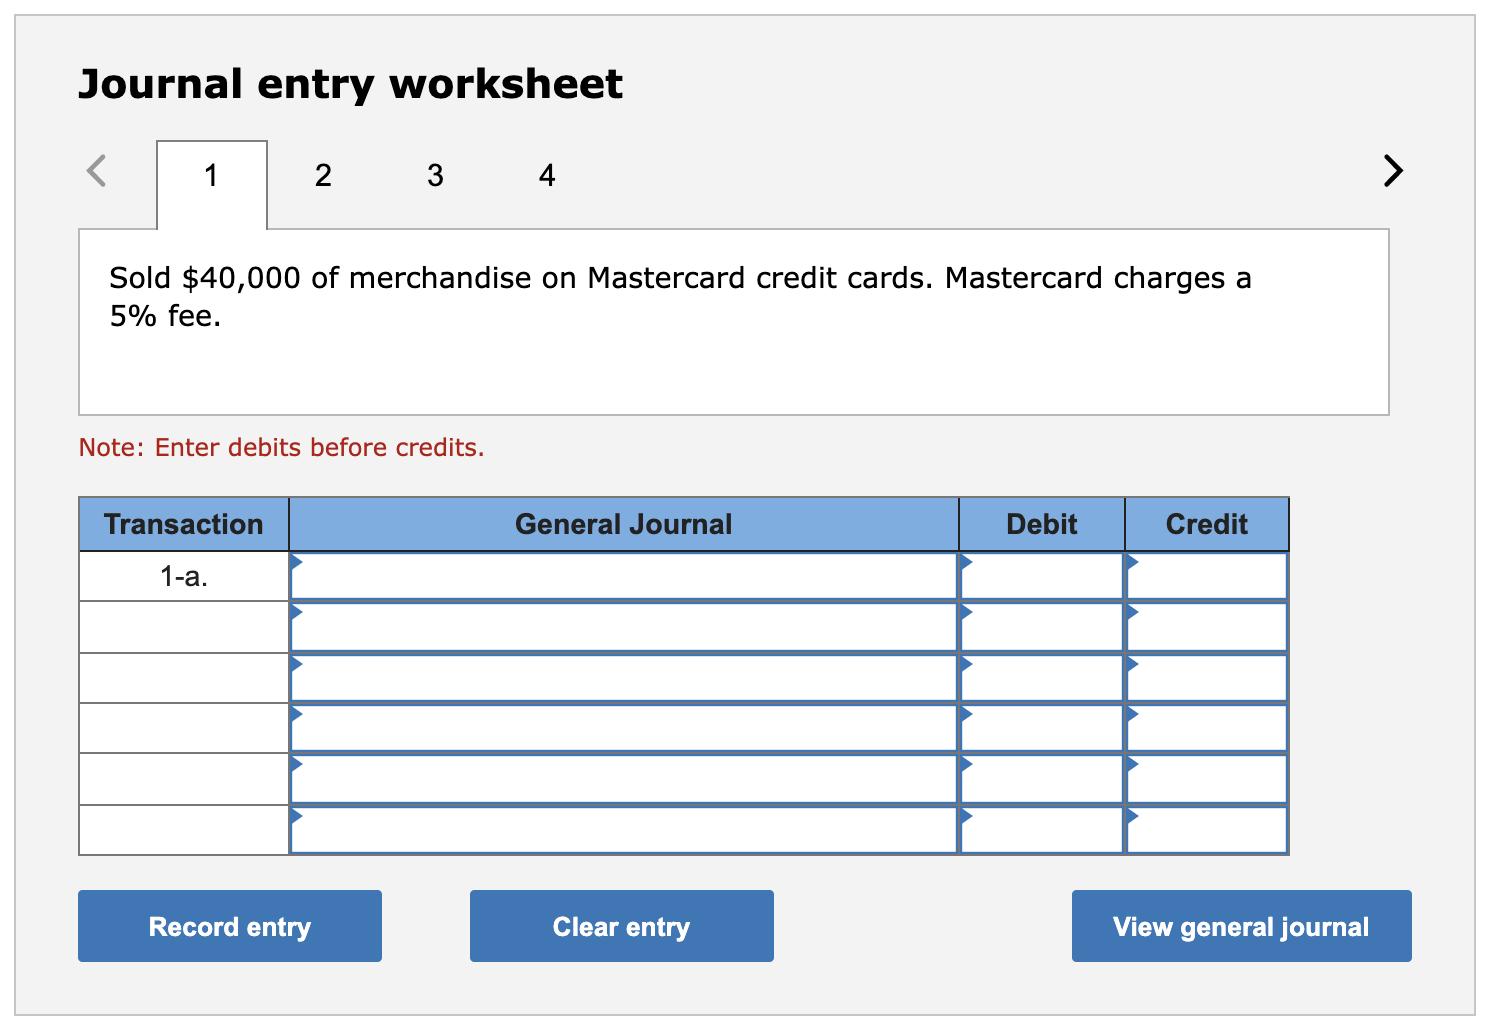 Journal entry worksheet 12 34 >Sold $40,000 of merchandise on Mastercard credit cards. Mastercard charges a 5% fee. Note: